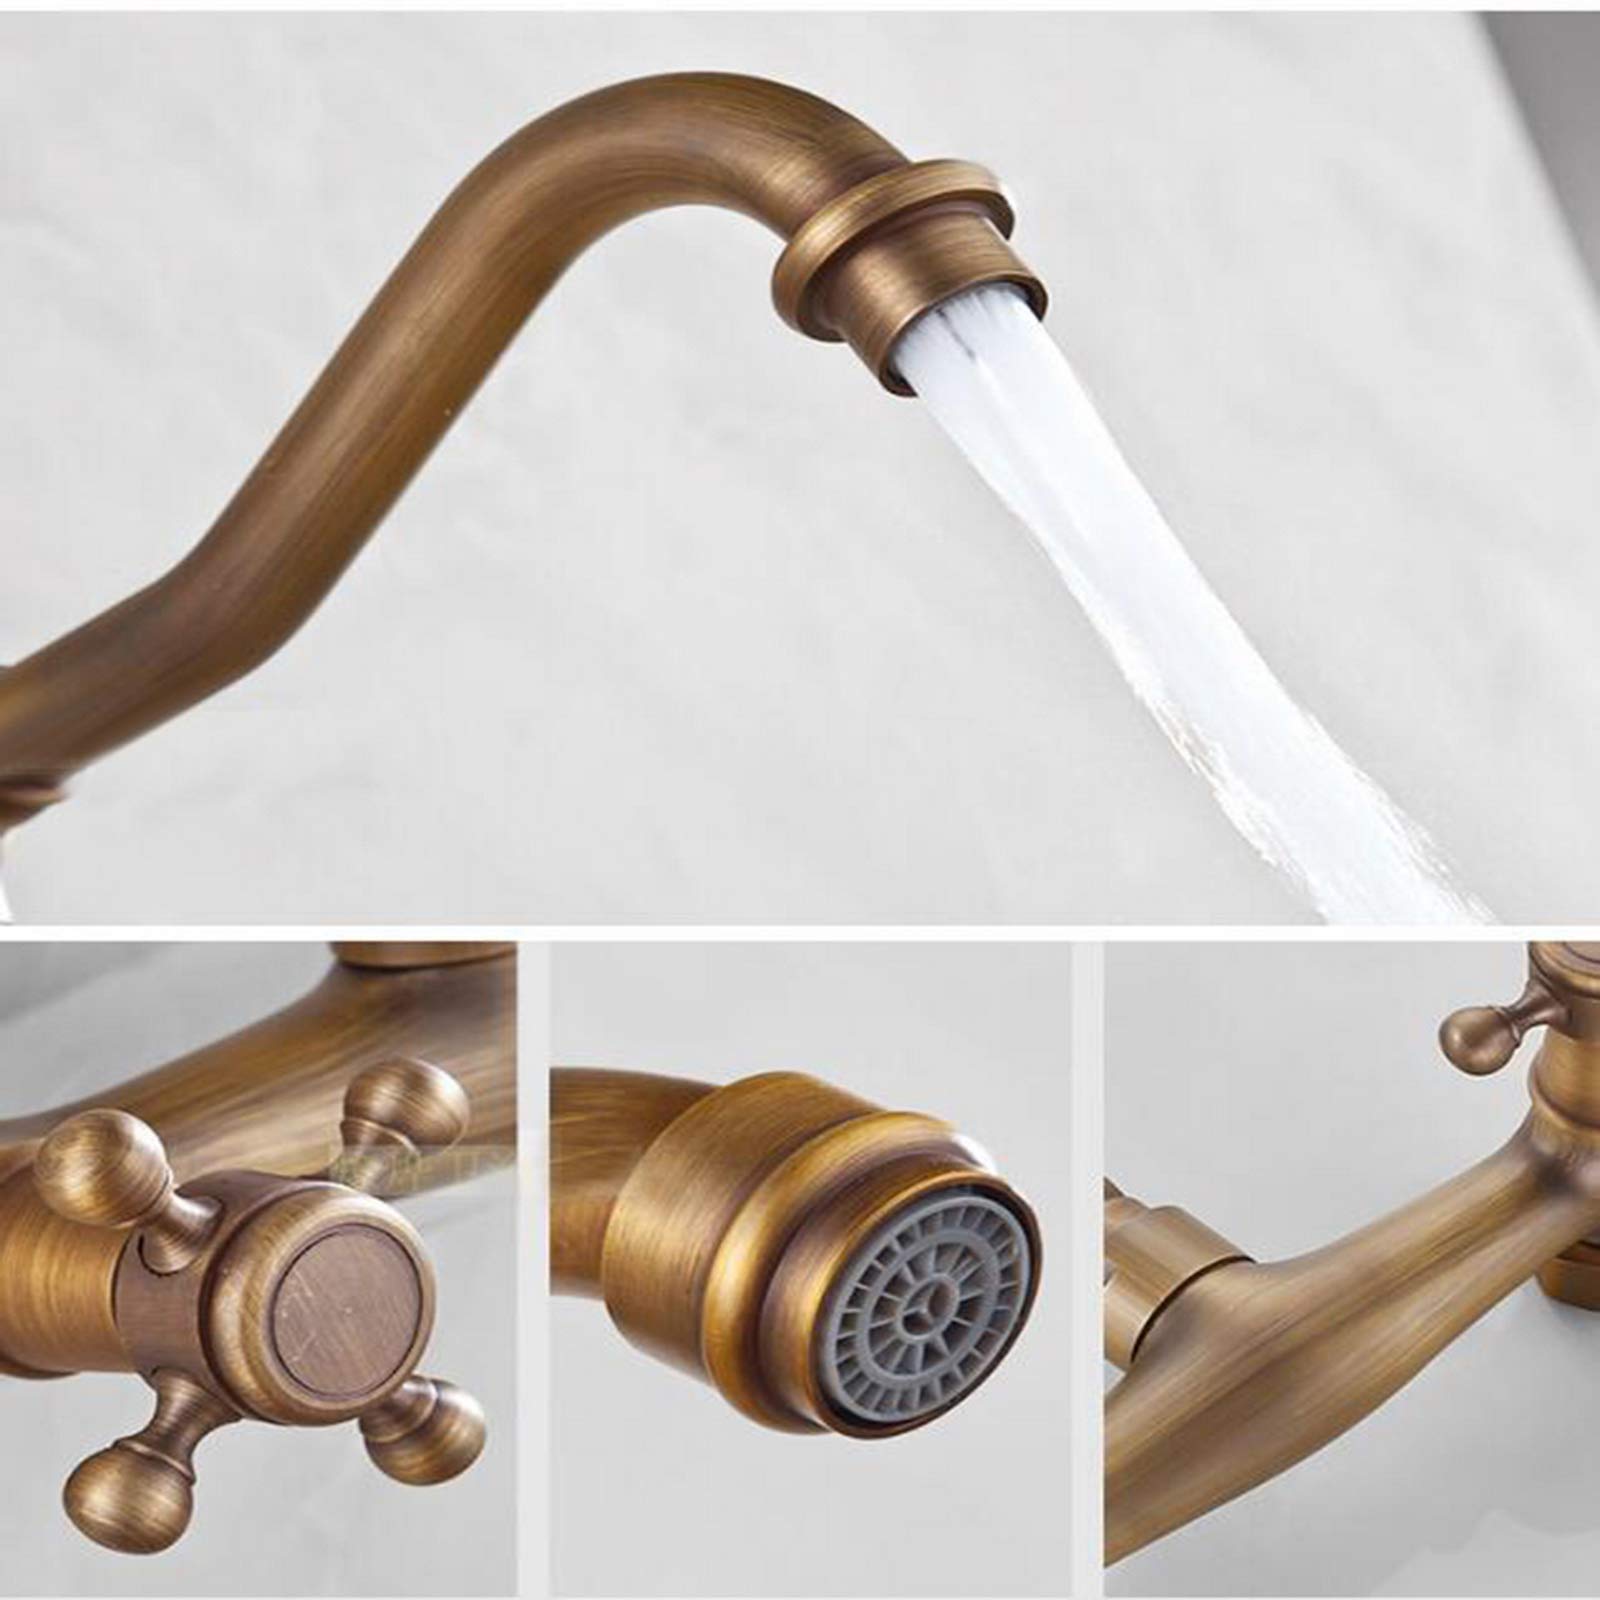 LightInTheBox Bathroom Wall Mounted Mixer Tub Filler Faucets Bathtub Faucet Two Handles Bathroom Sink Faucet Solid Brass Gold